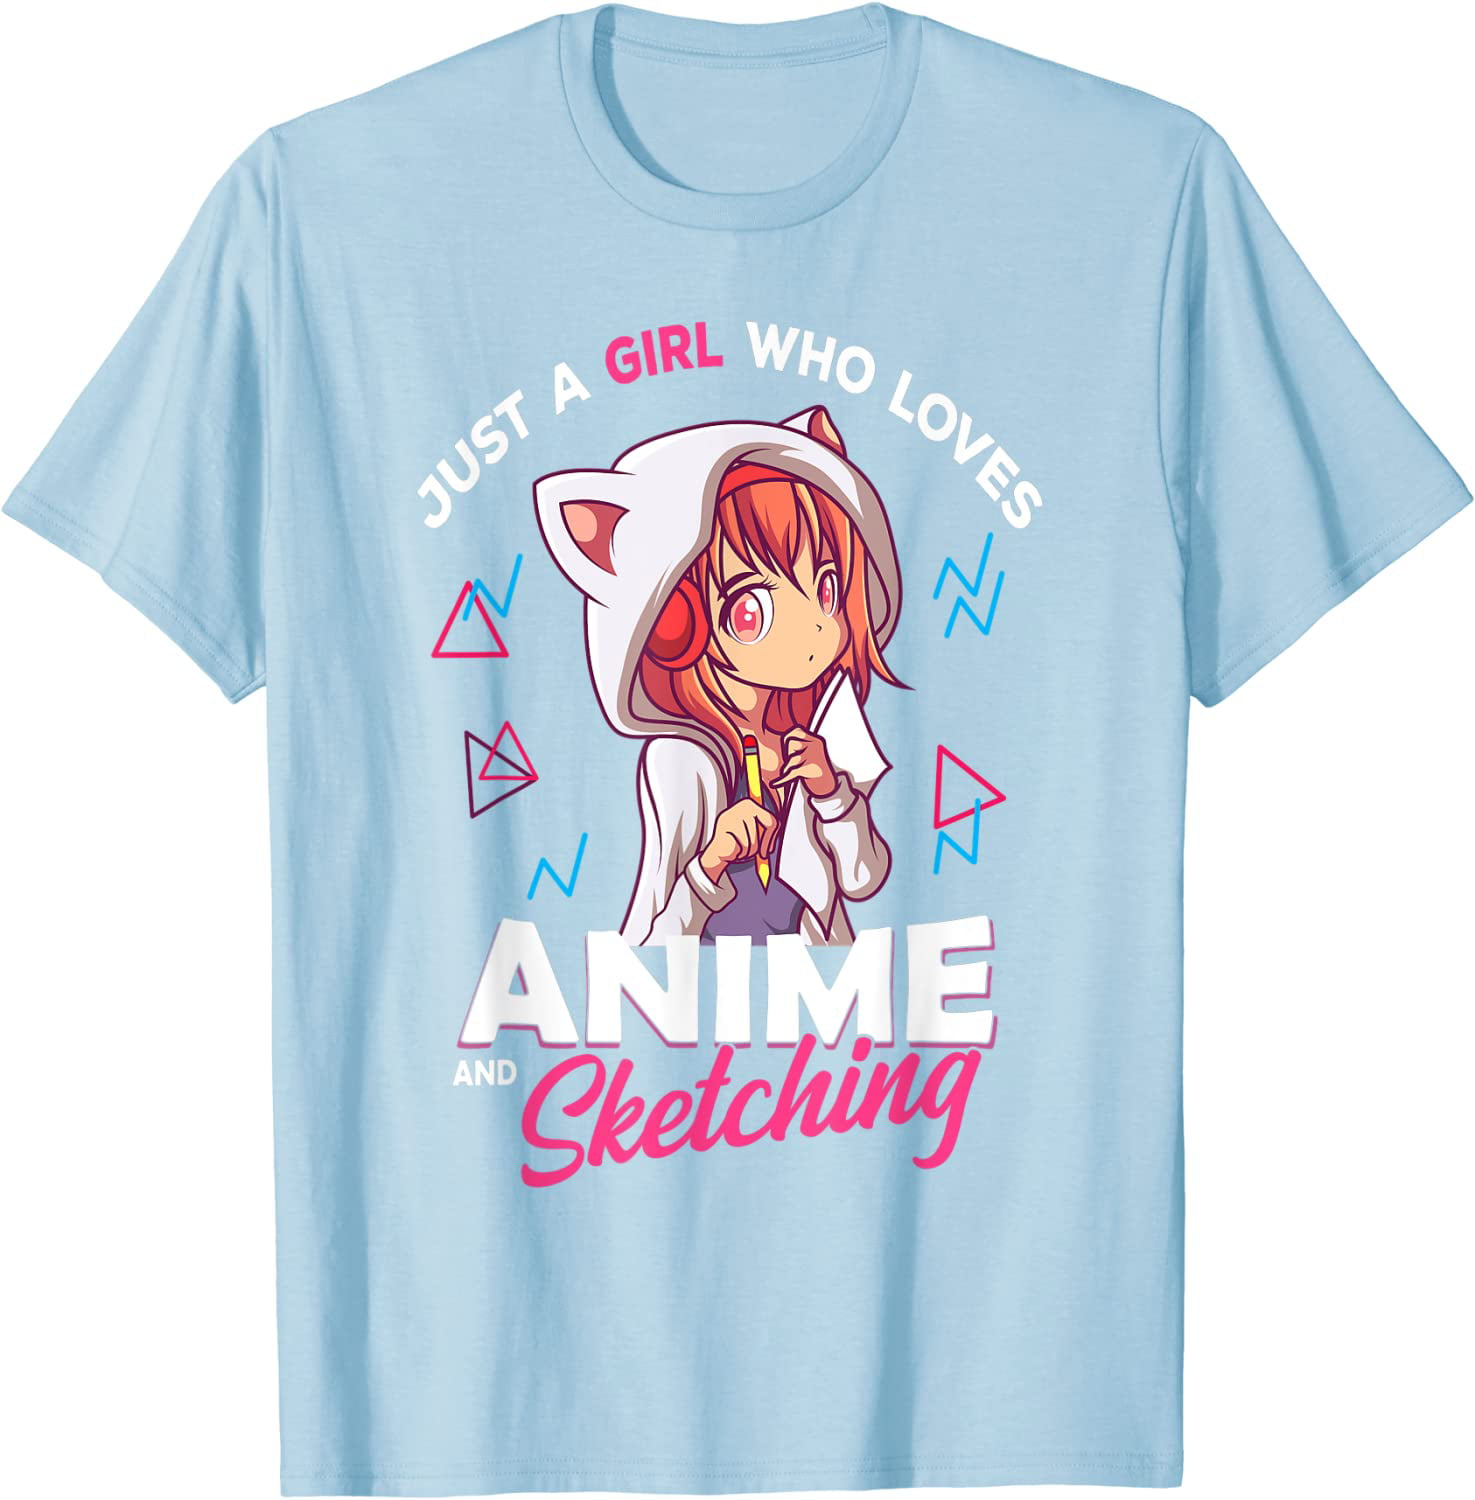 Just A Girl Who Loves Anime and Sketching Otaku Anime Merch T-Shirt -  